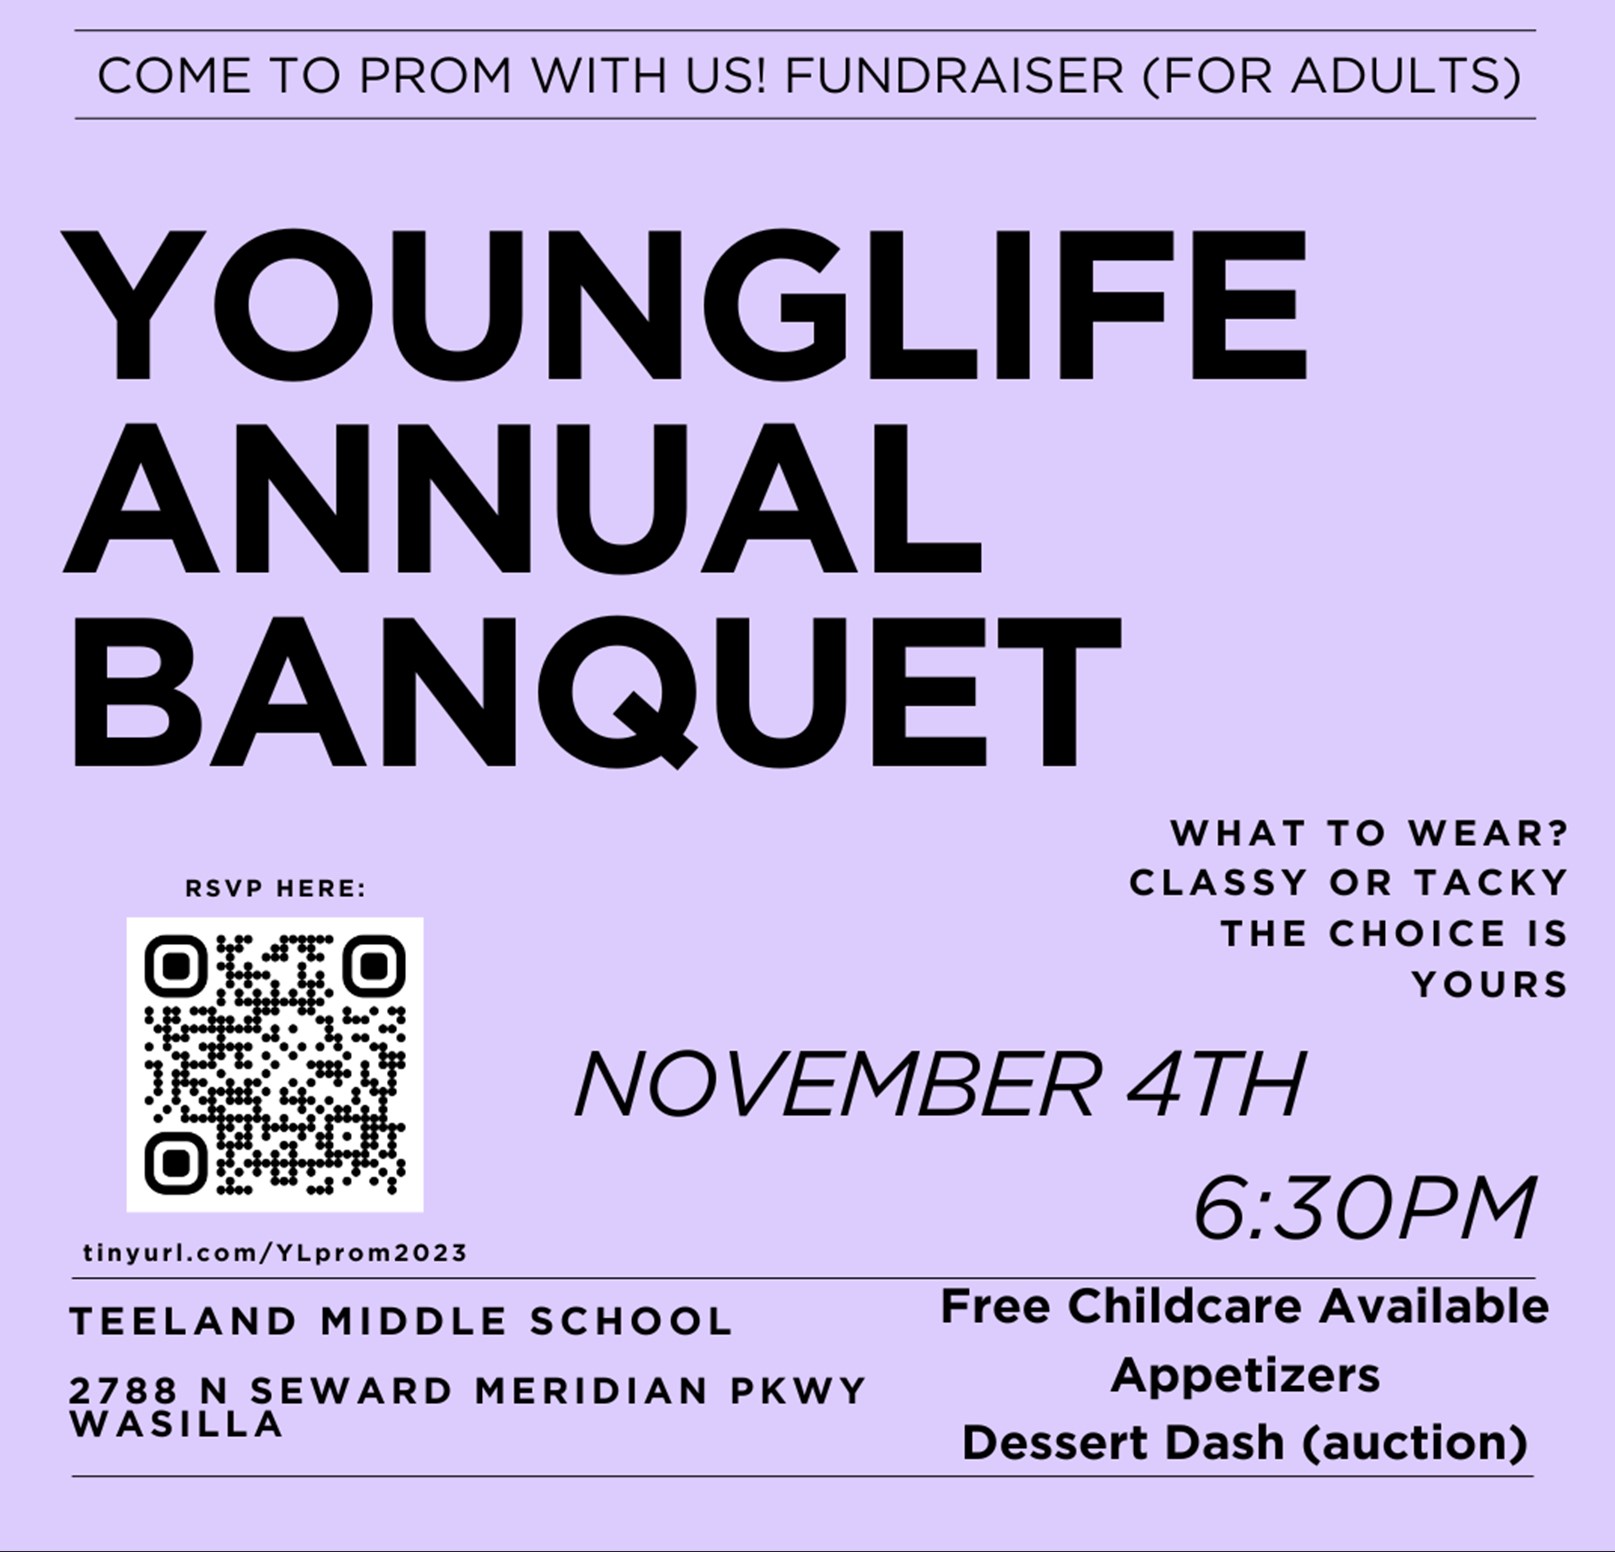 Flyer for youthgroup fundraiser hosted at local middle school.